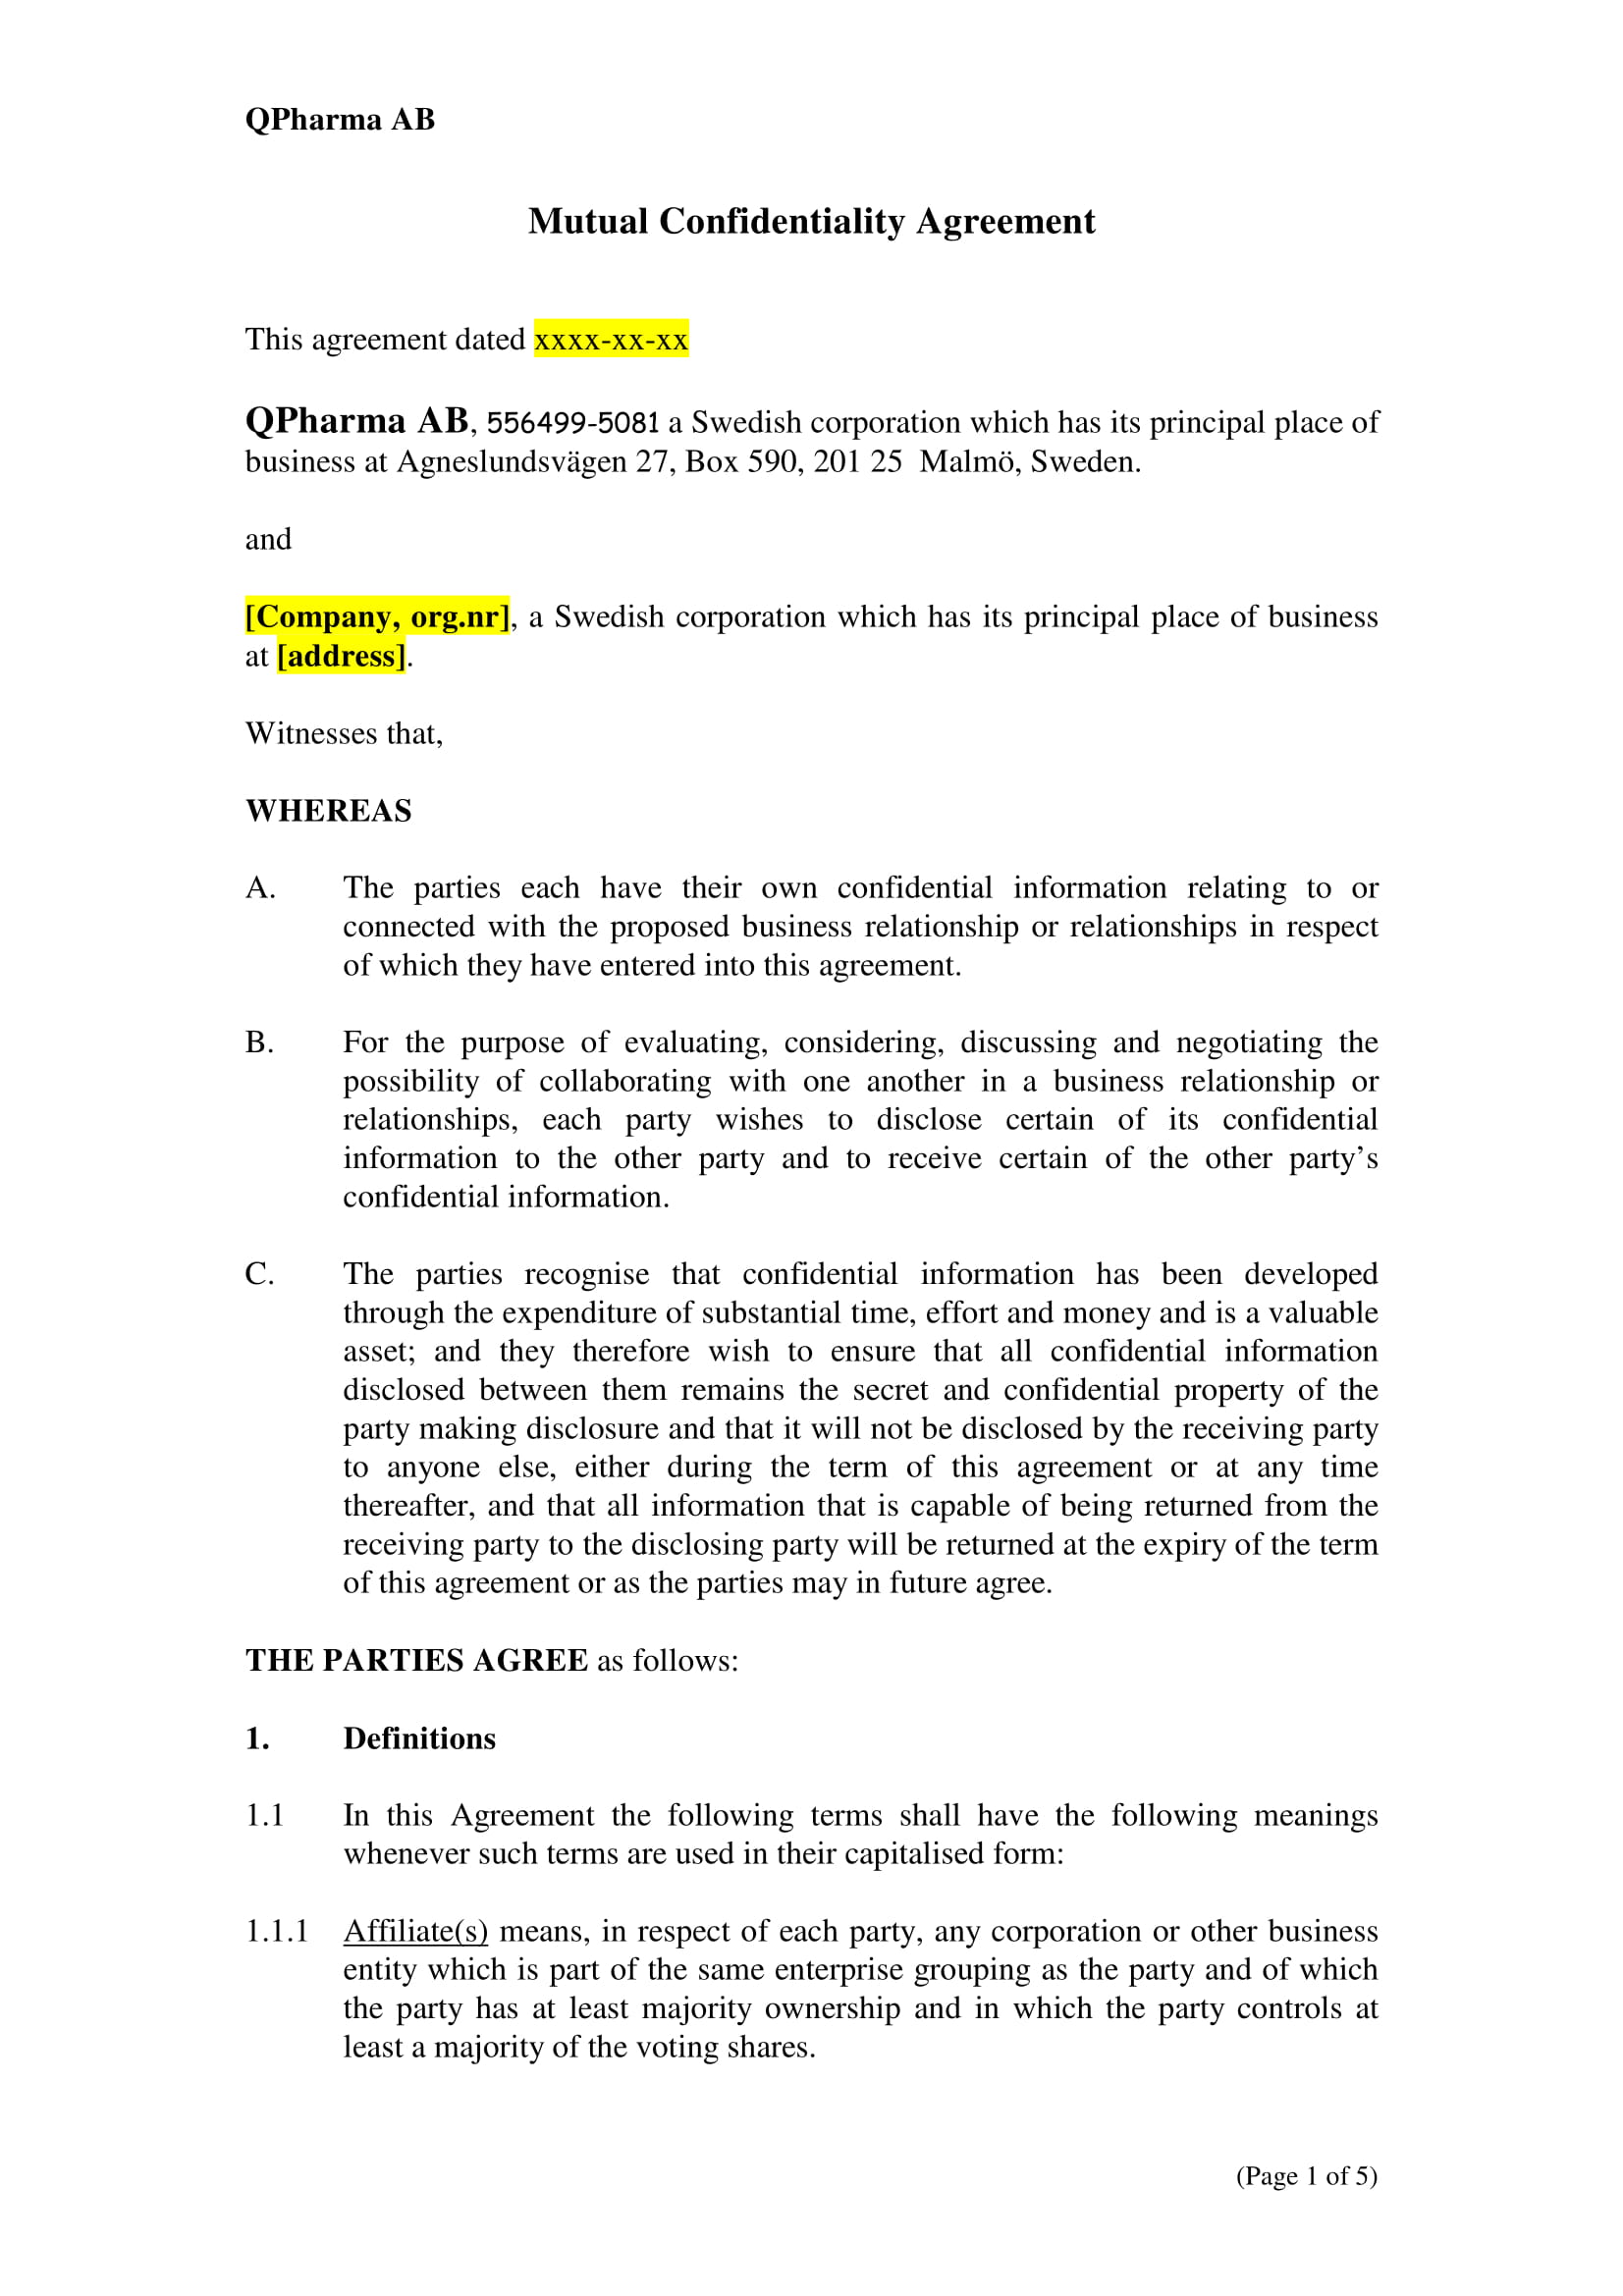 mutual confidentiality agreement example 1